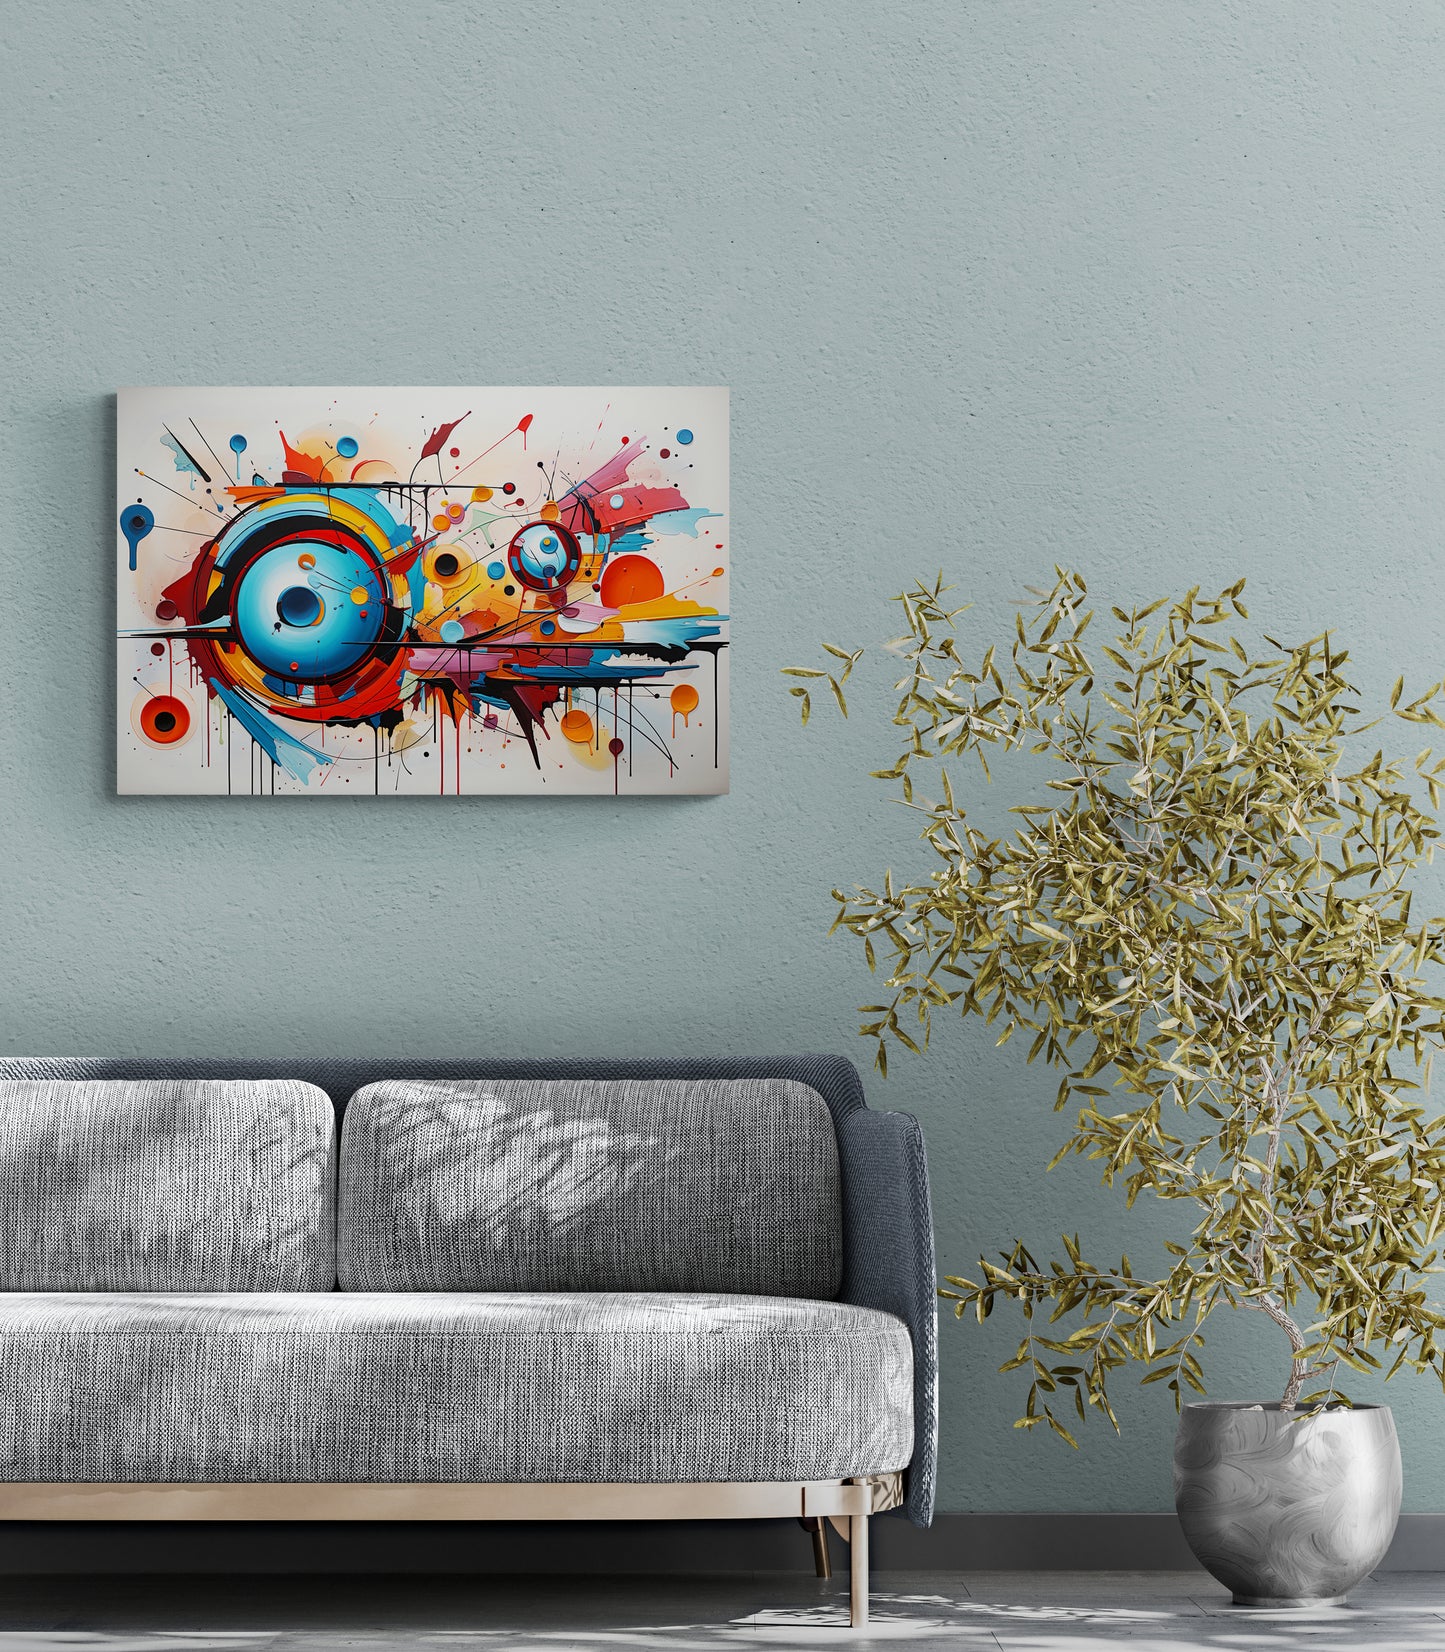 Abstract Spherical Explosion 1: Dynamic Graffiti Sphere with Colorful Splashes Canvas Wall Art | NW-001c